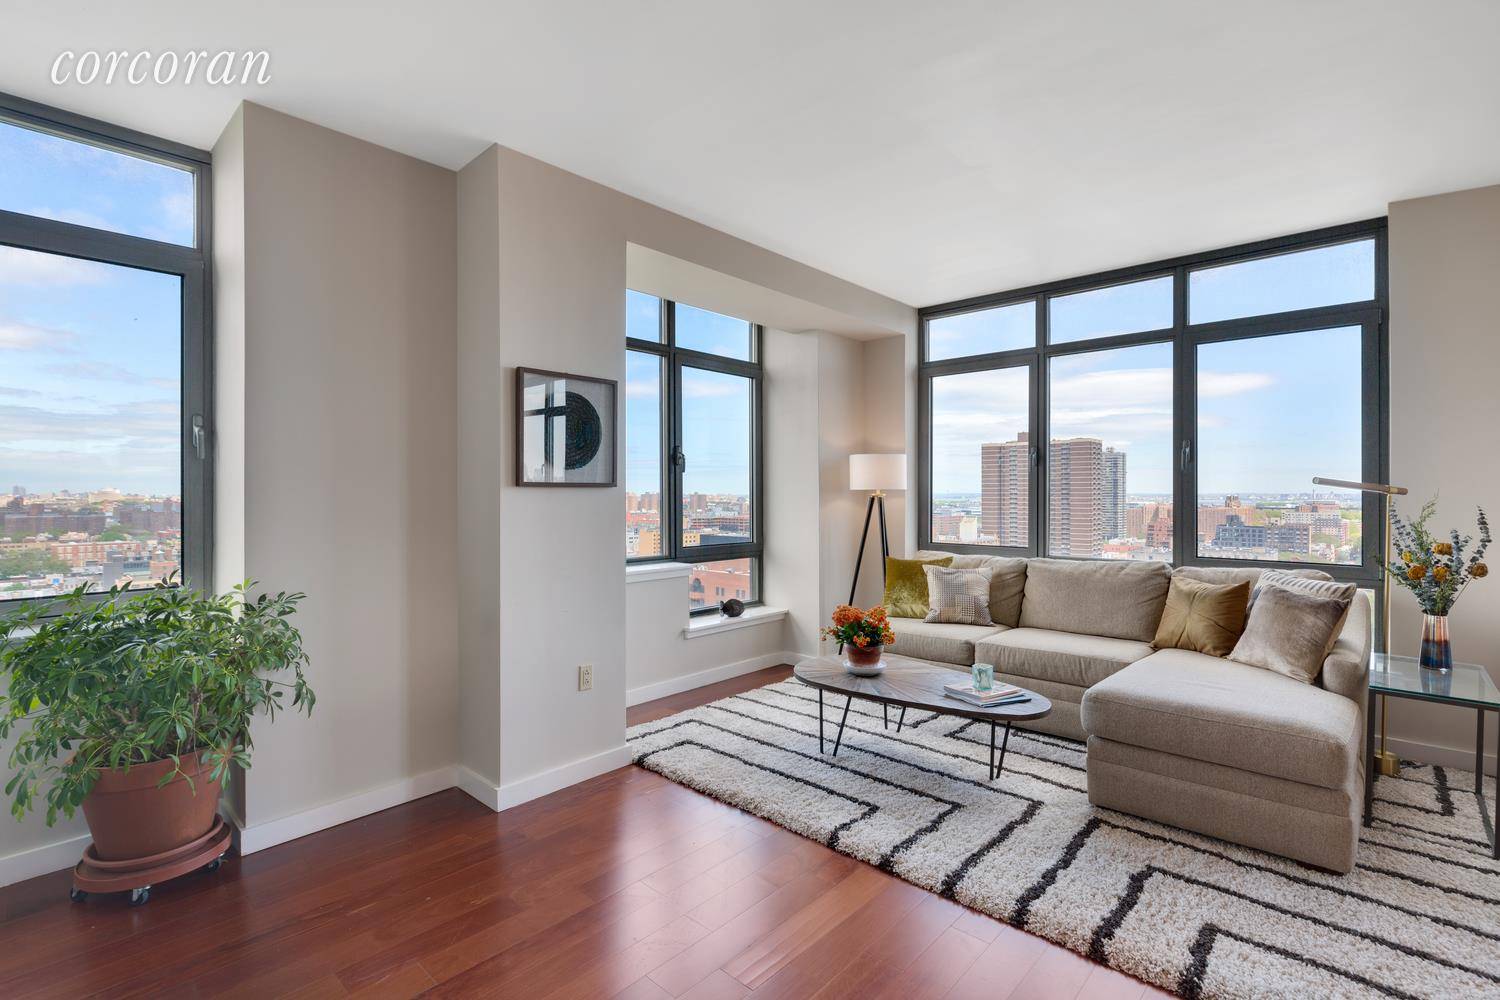 Welcome to 1485 5th Avenue 19C This spacious corner three bedroom, two bath apartment features southern, northern, and eastern exposures, and is located in a full service luxury condominium building ...